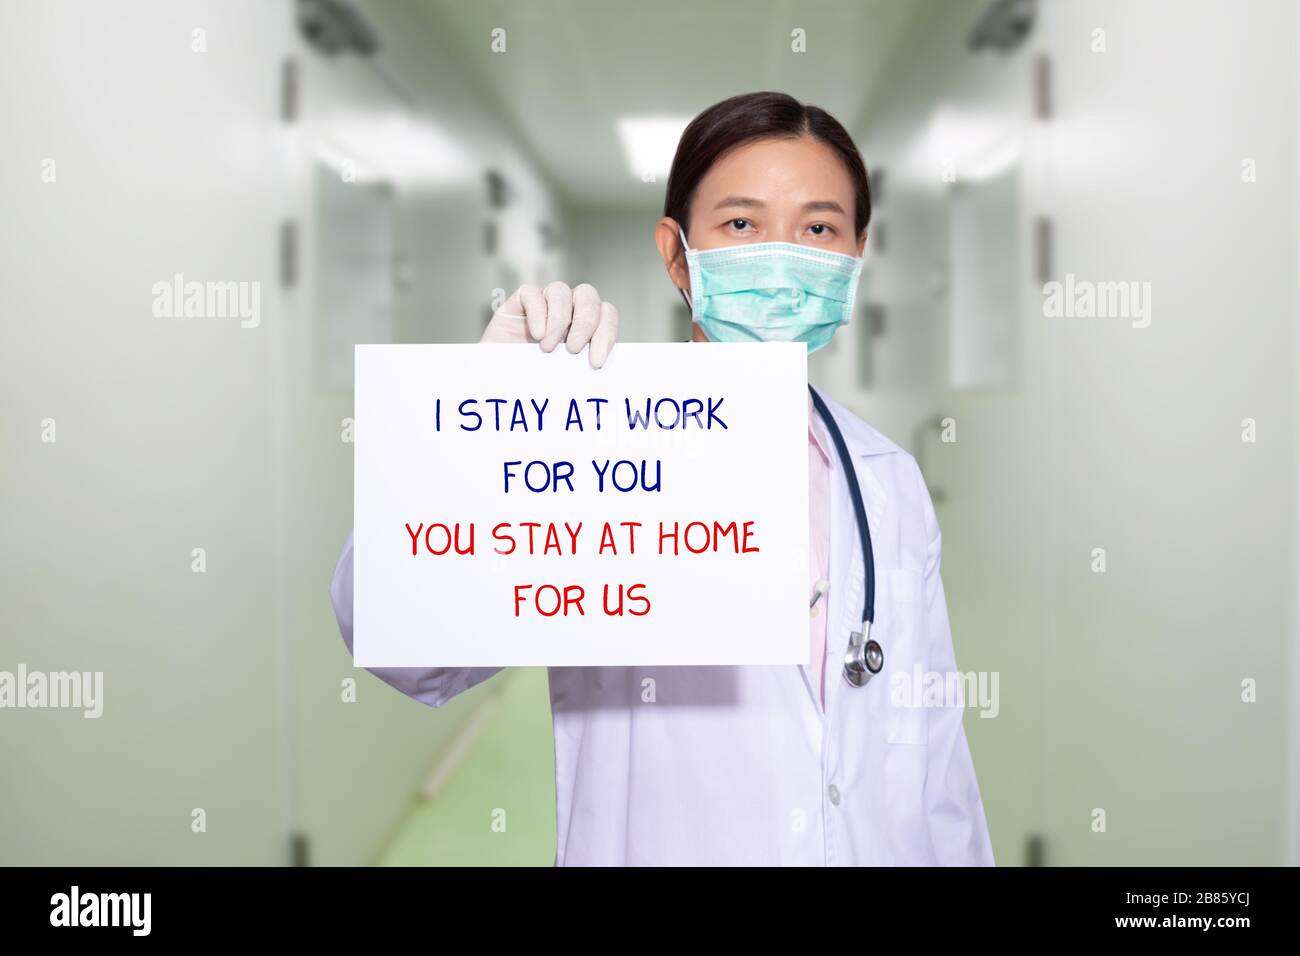 Asian doctor at hospital wear medical masks, holding paper with text I STAY AT WORK FOR YOU, YOU STAY AT HOME FOR US. stay at home policy campaign to Stock Photo